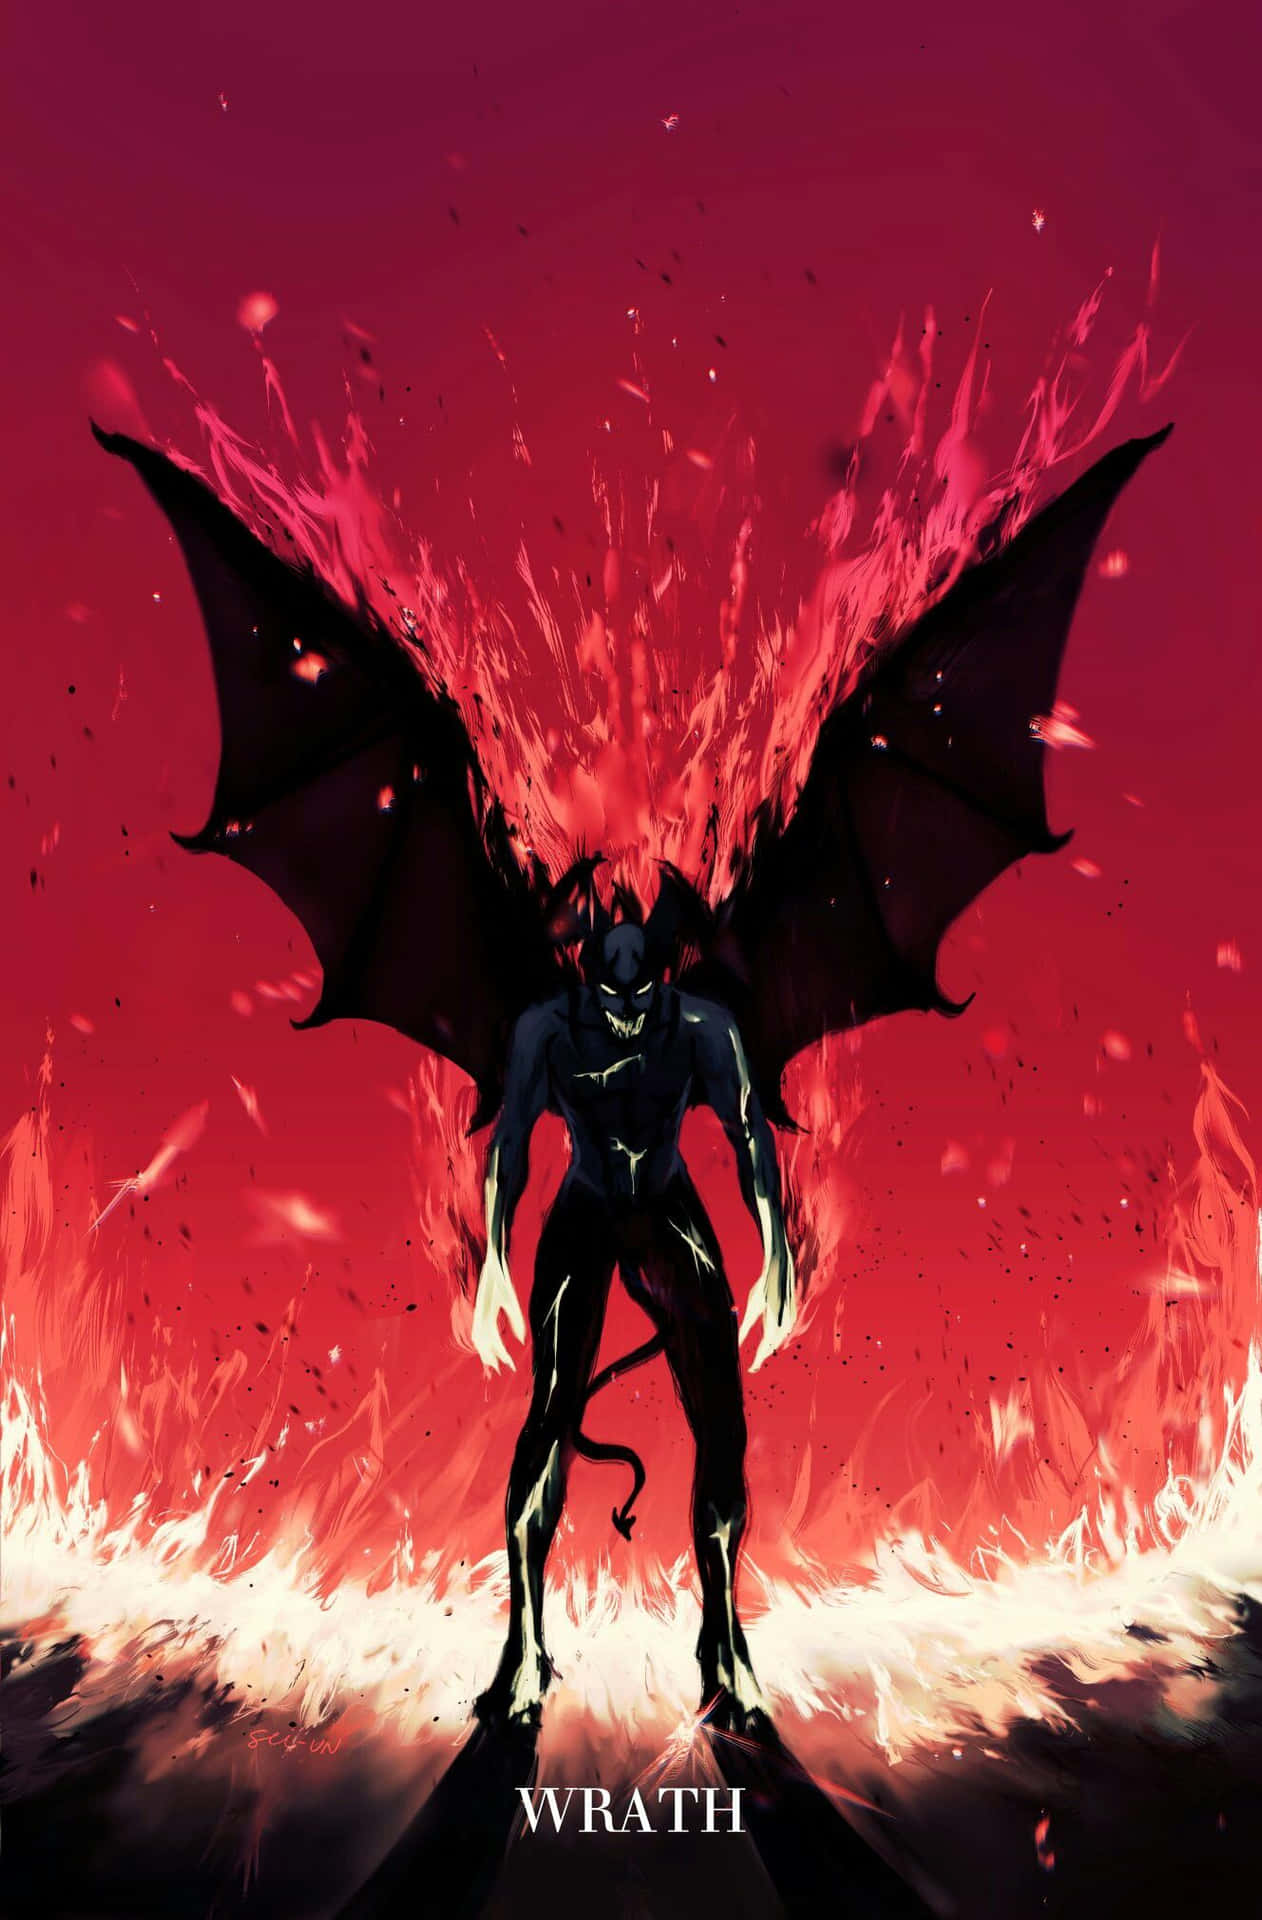 "Defy Your Limits With Devilman Crybaby"